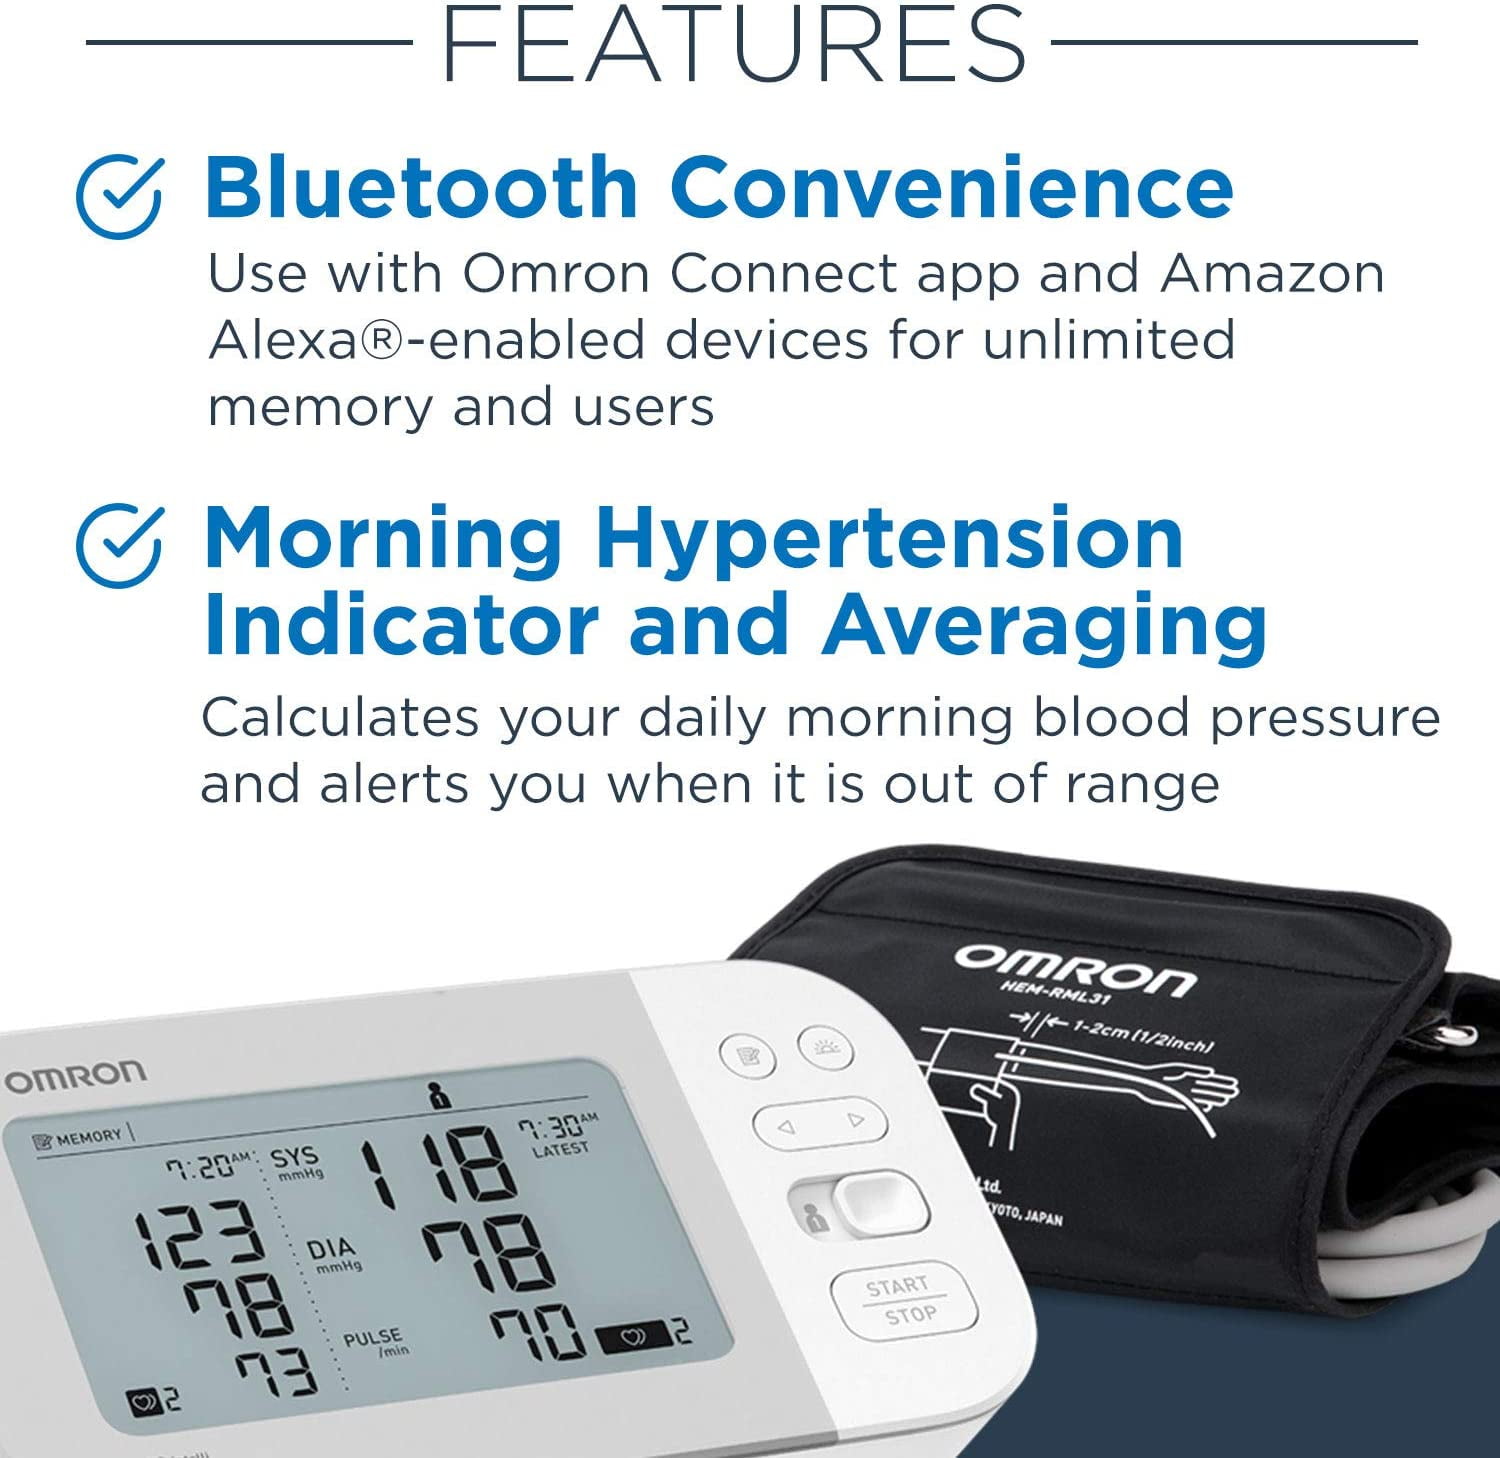 OMRON Gold Blood Pressure Monitor, Premium Upper Arm Cuff, Digital  Bluetooth Machine, Stores Up To 120 Readings for Two Users (60 readings  each) 